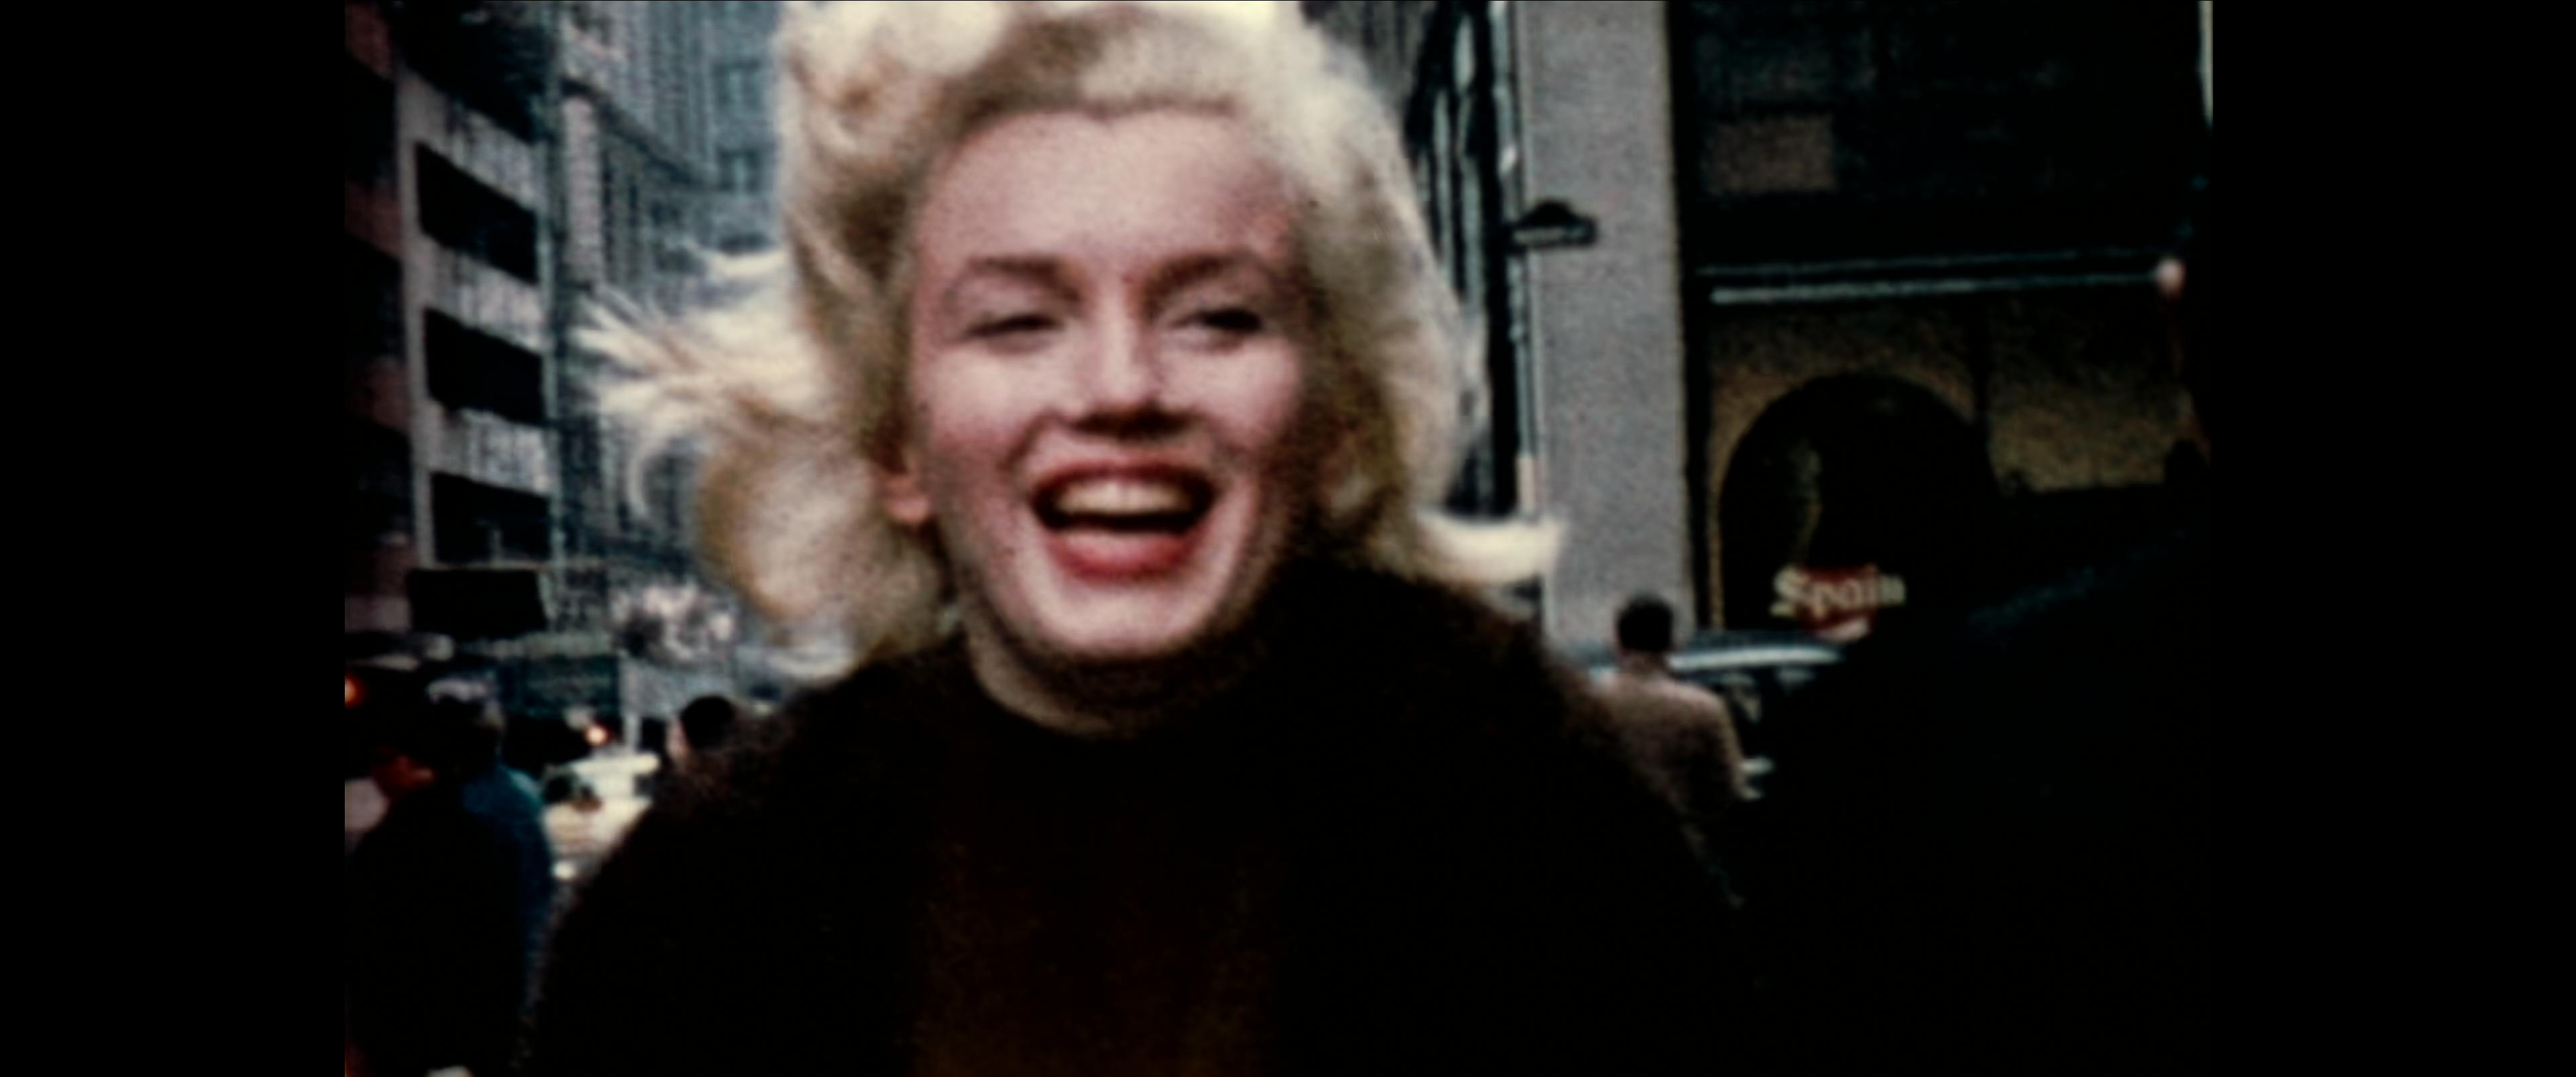 Marilyn Monroe wears a black top, her classic red lip, and smiles wide as she walks around what looks like a New York. 